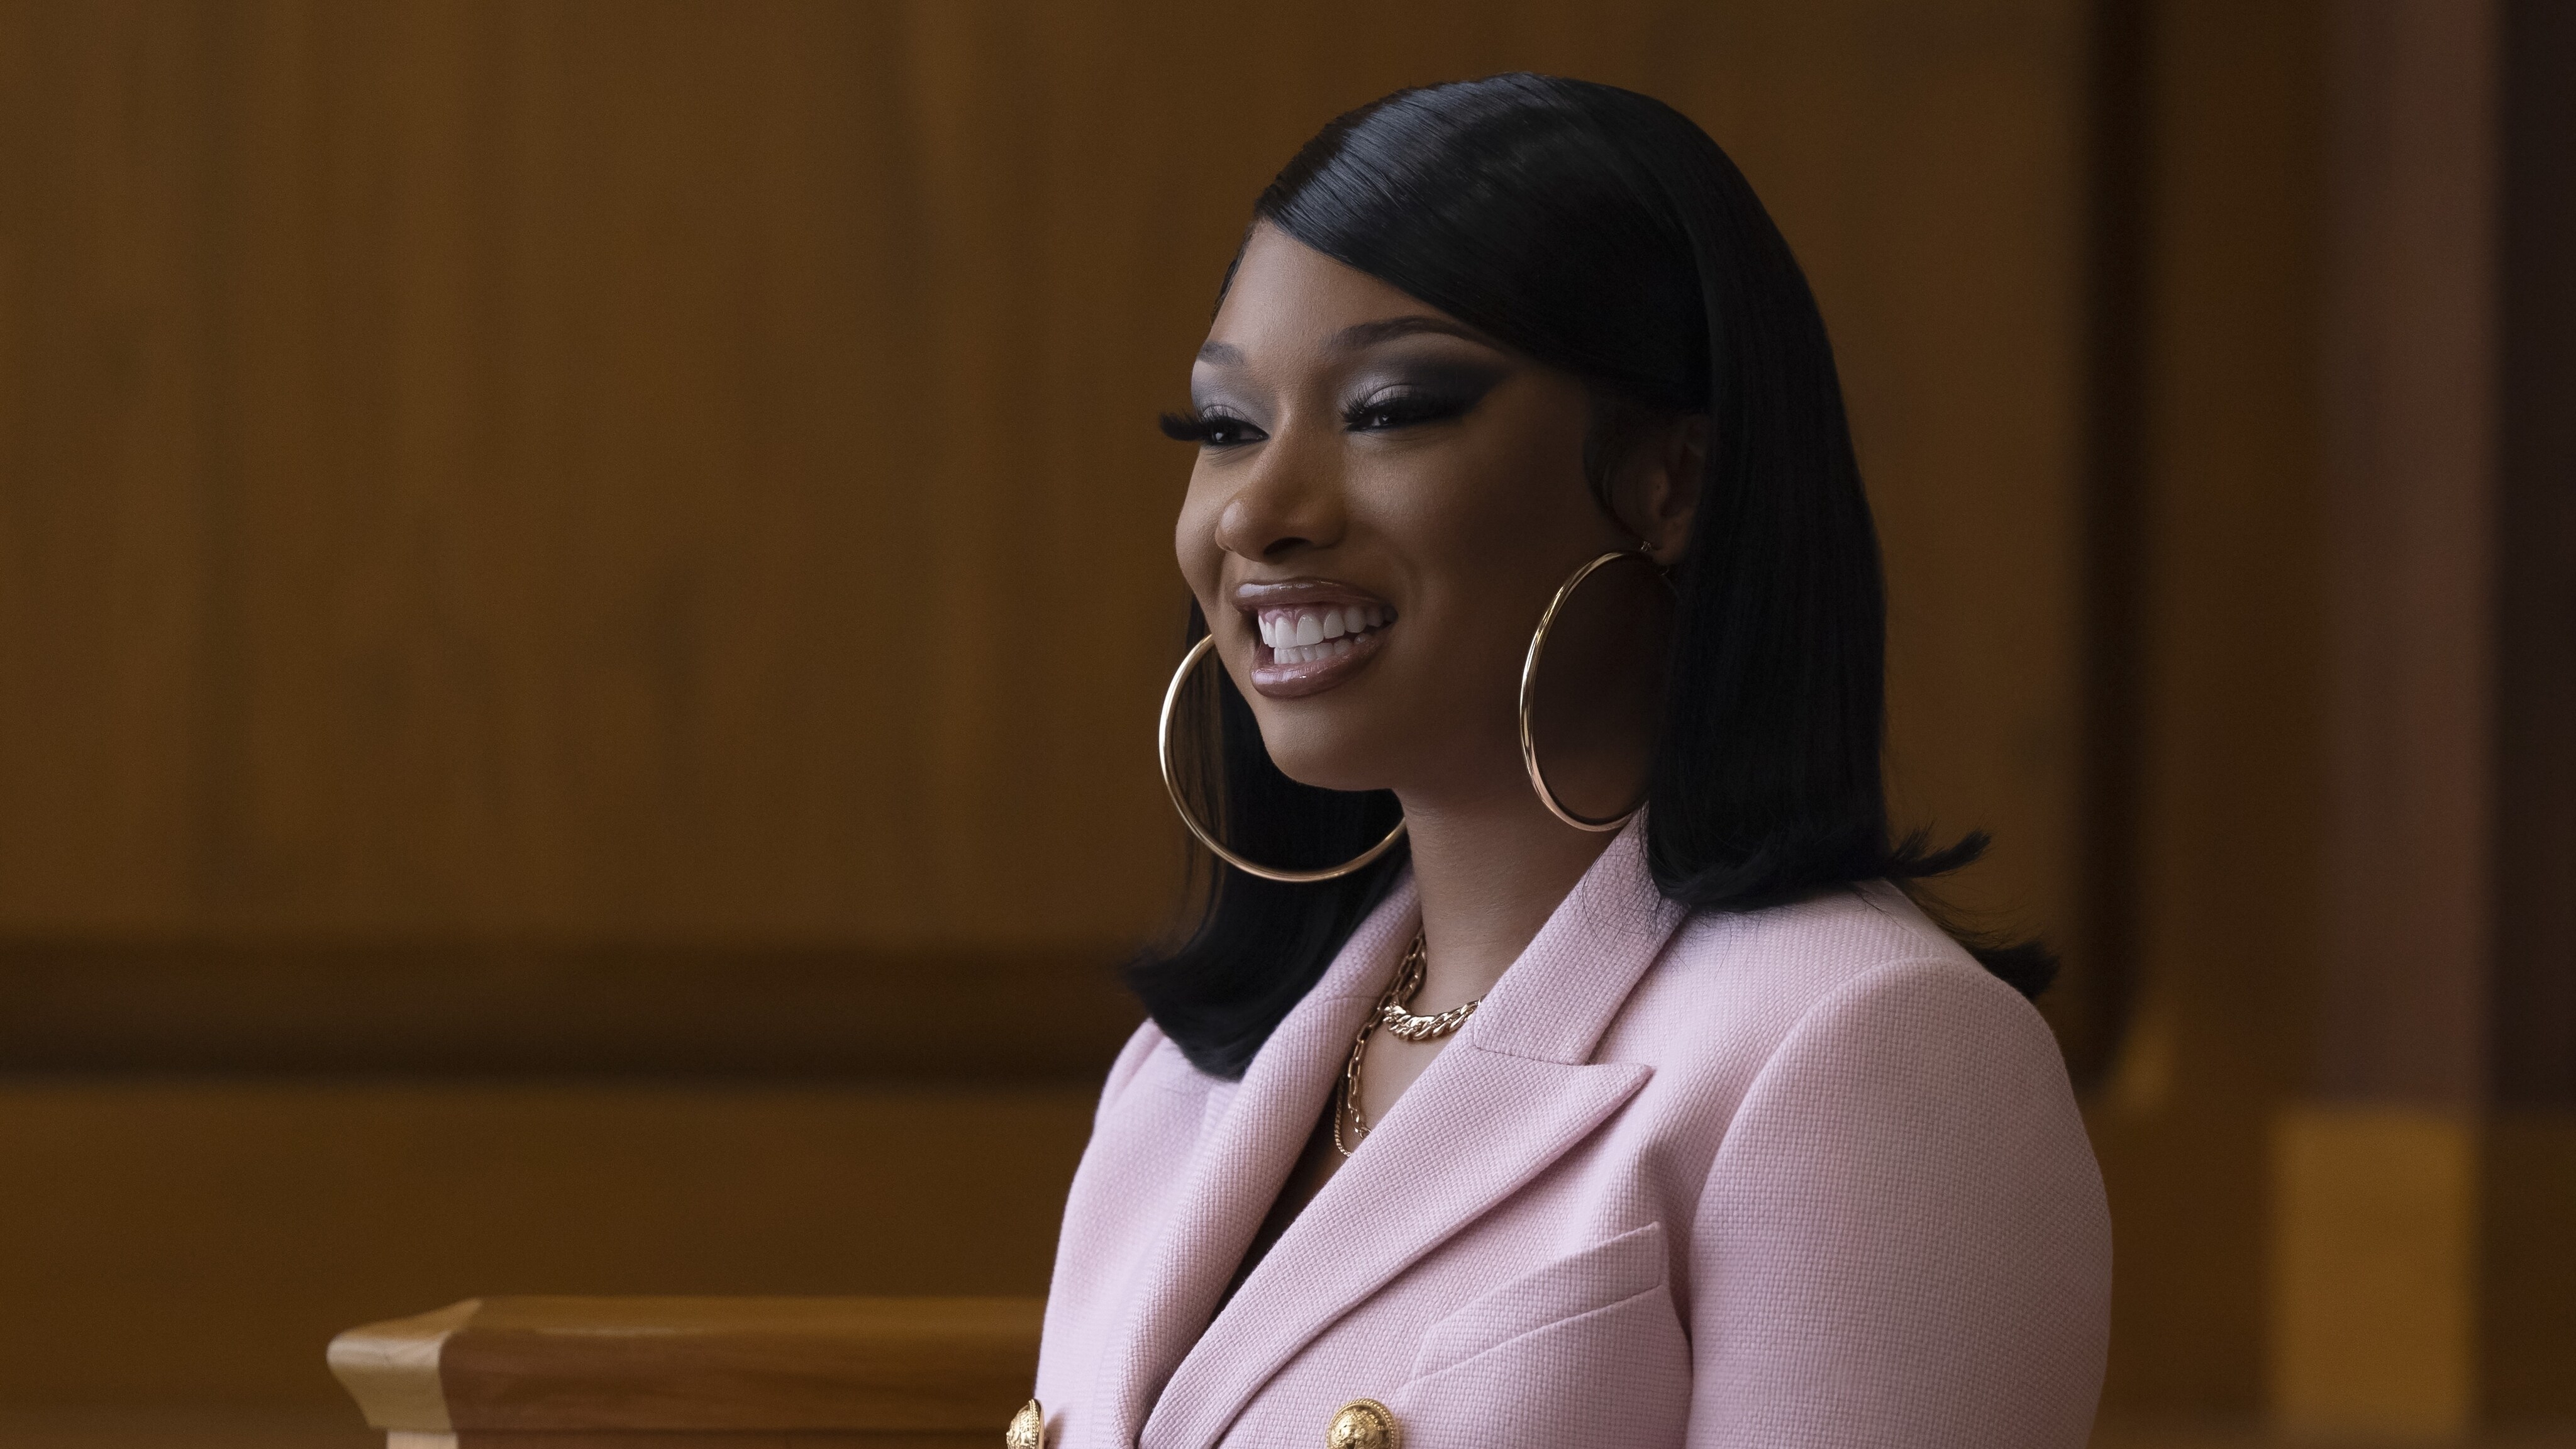 Megan Thee Stallion in Marvel Studios' She-Hulk: Attorney At Law, exclusively on Disney+. Photo by Chuck Zlotnick. © 2022 MARVEL.